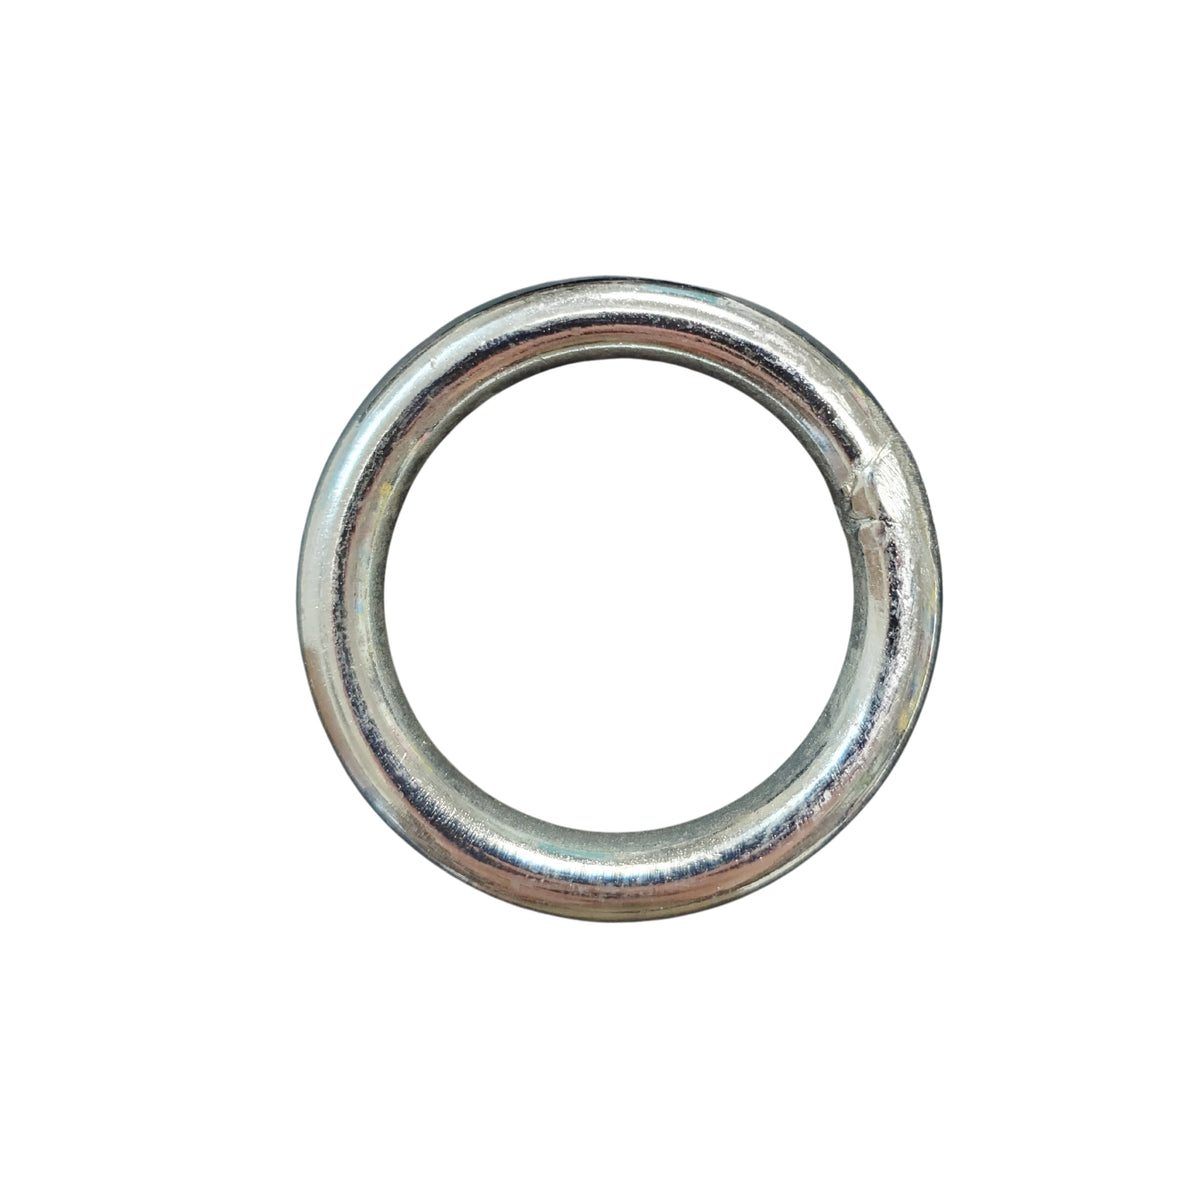 2" Heavy Duty Round Ring - 10,000 lbs Breaking Strength